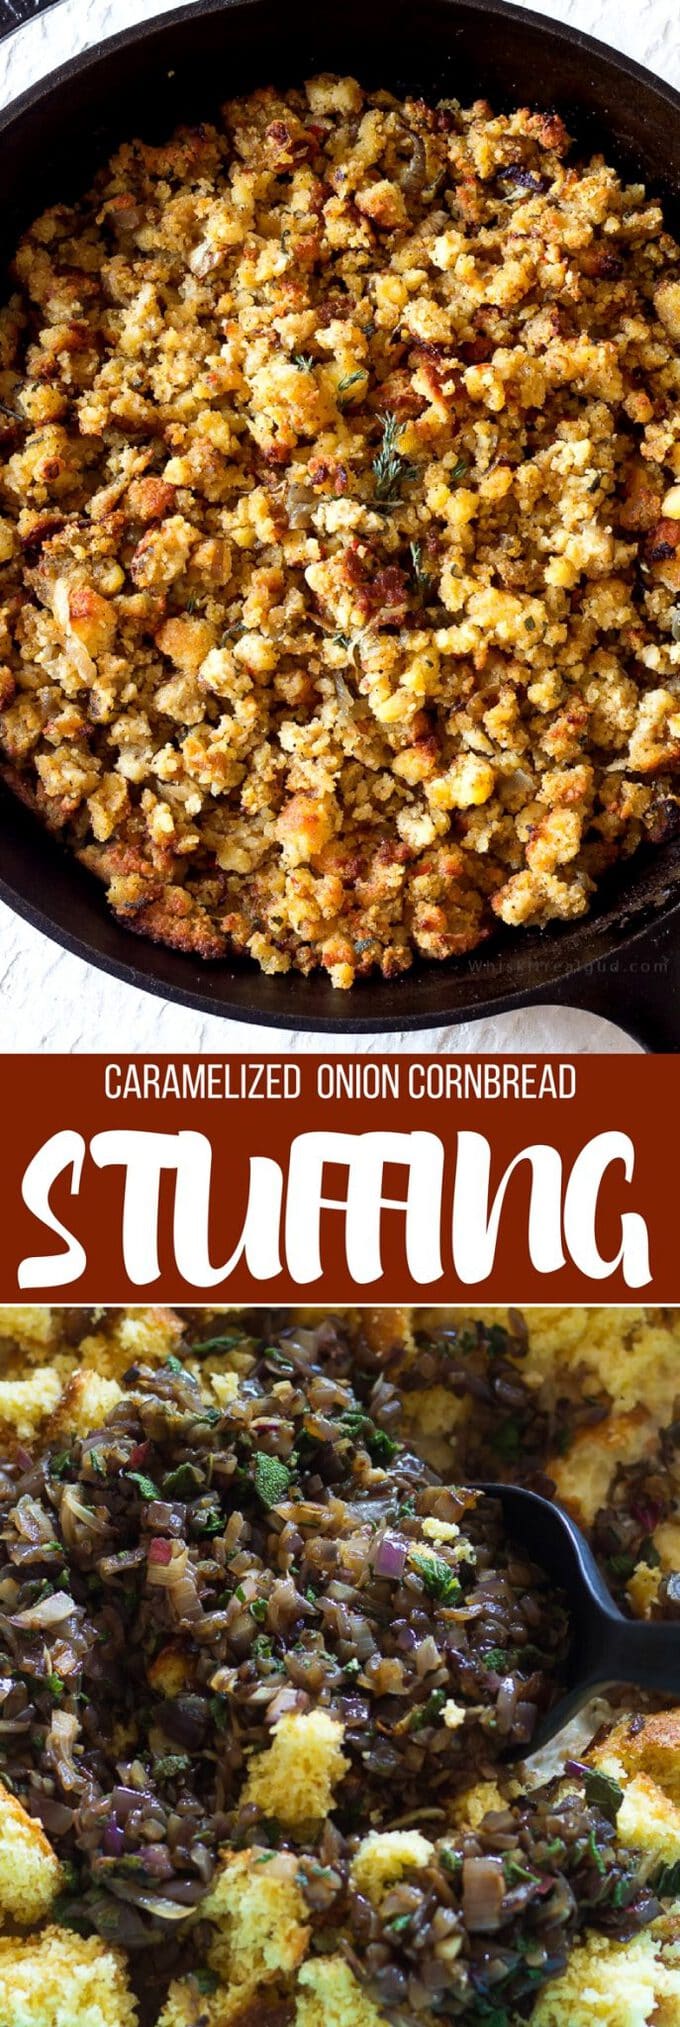 Simple Cornbread stuffing/dressing comes together easily. Caramelized onions, sweet corn muffins and fresh sage. This Cornbread stuffing is moist with a slightly craggy soft top. Simply delicious!